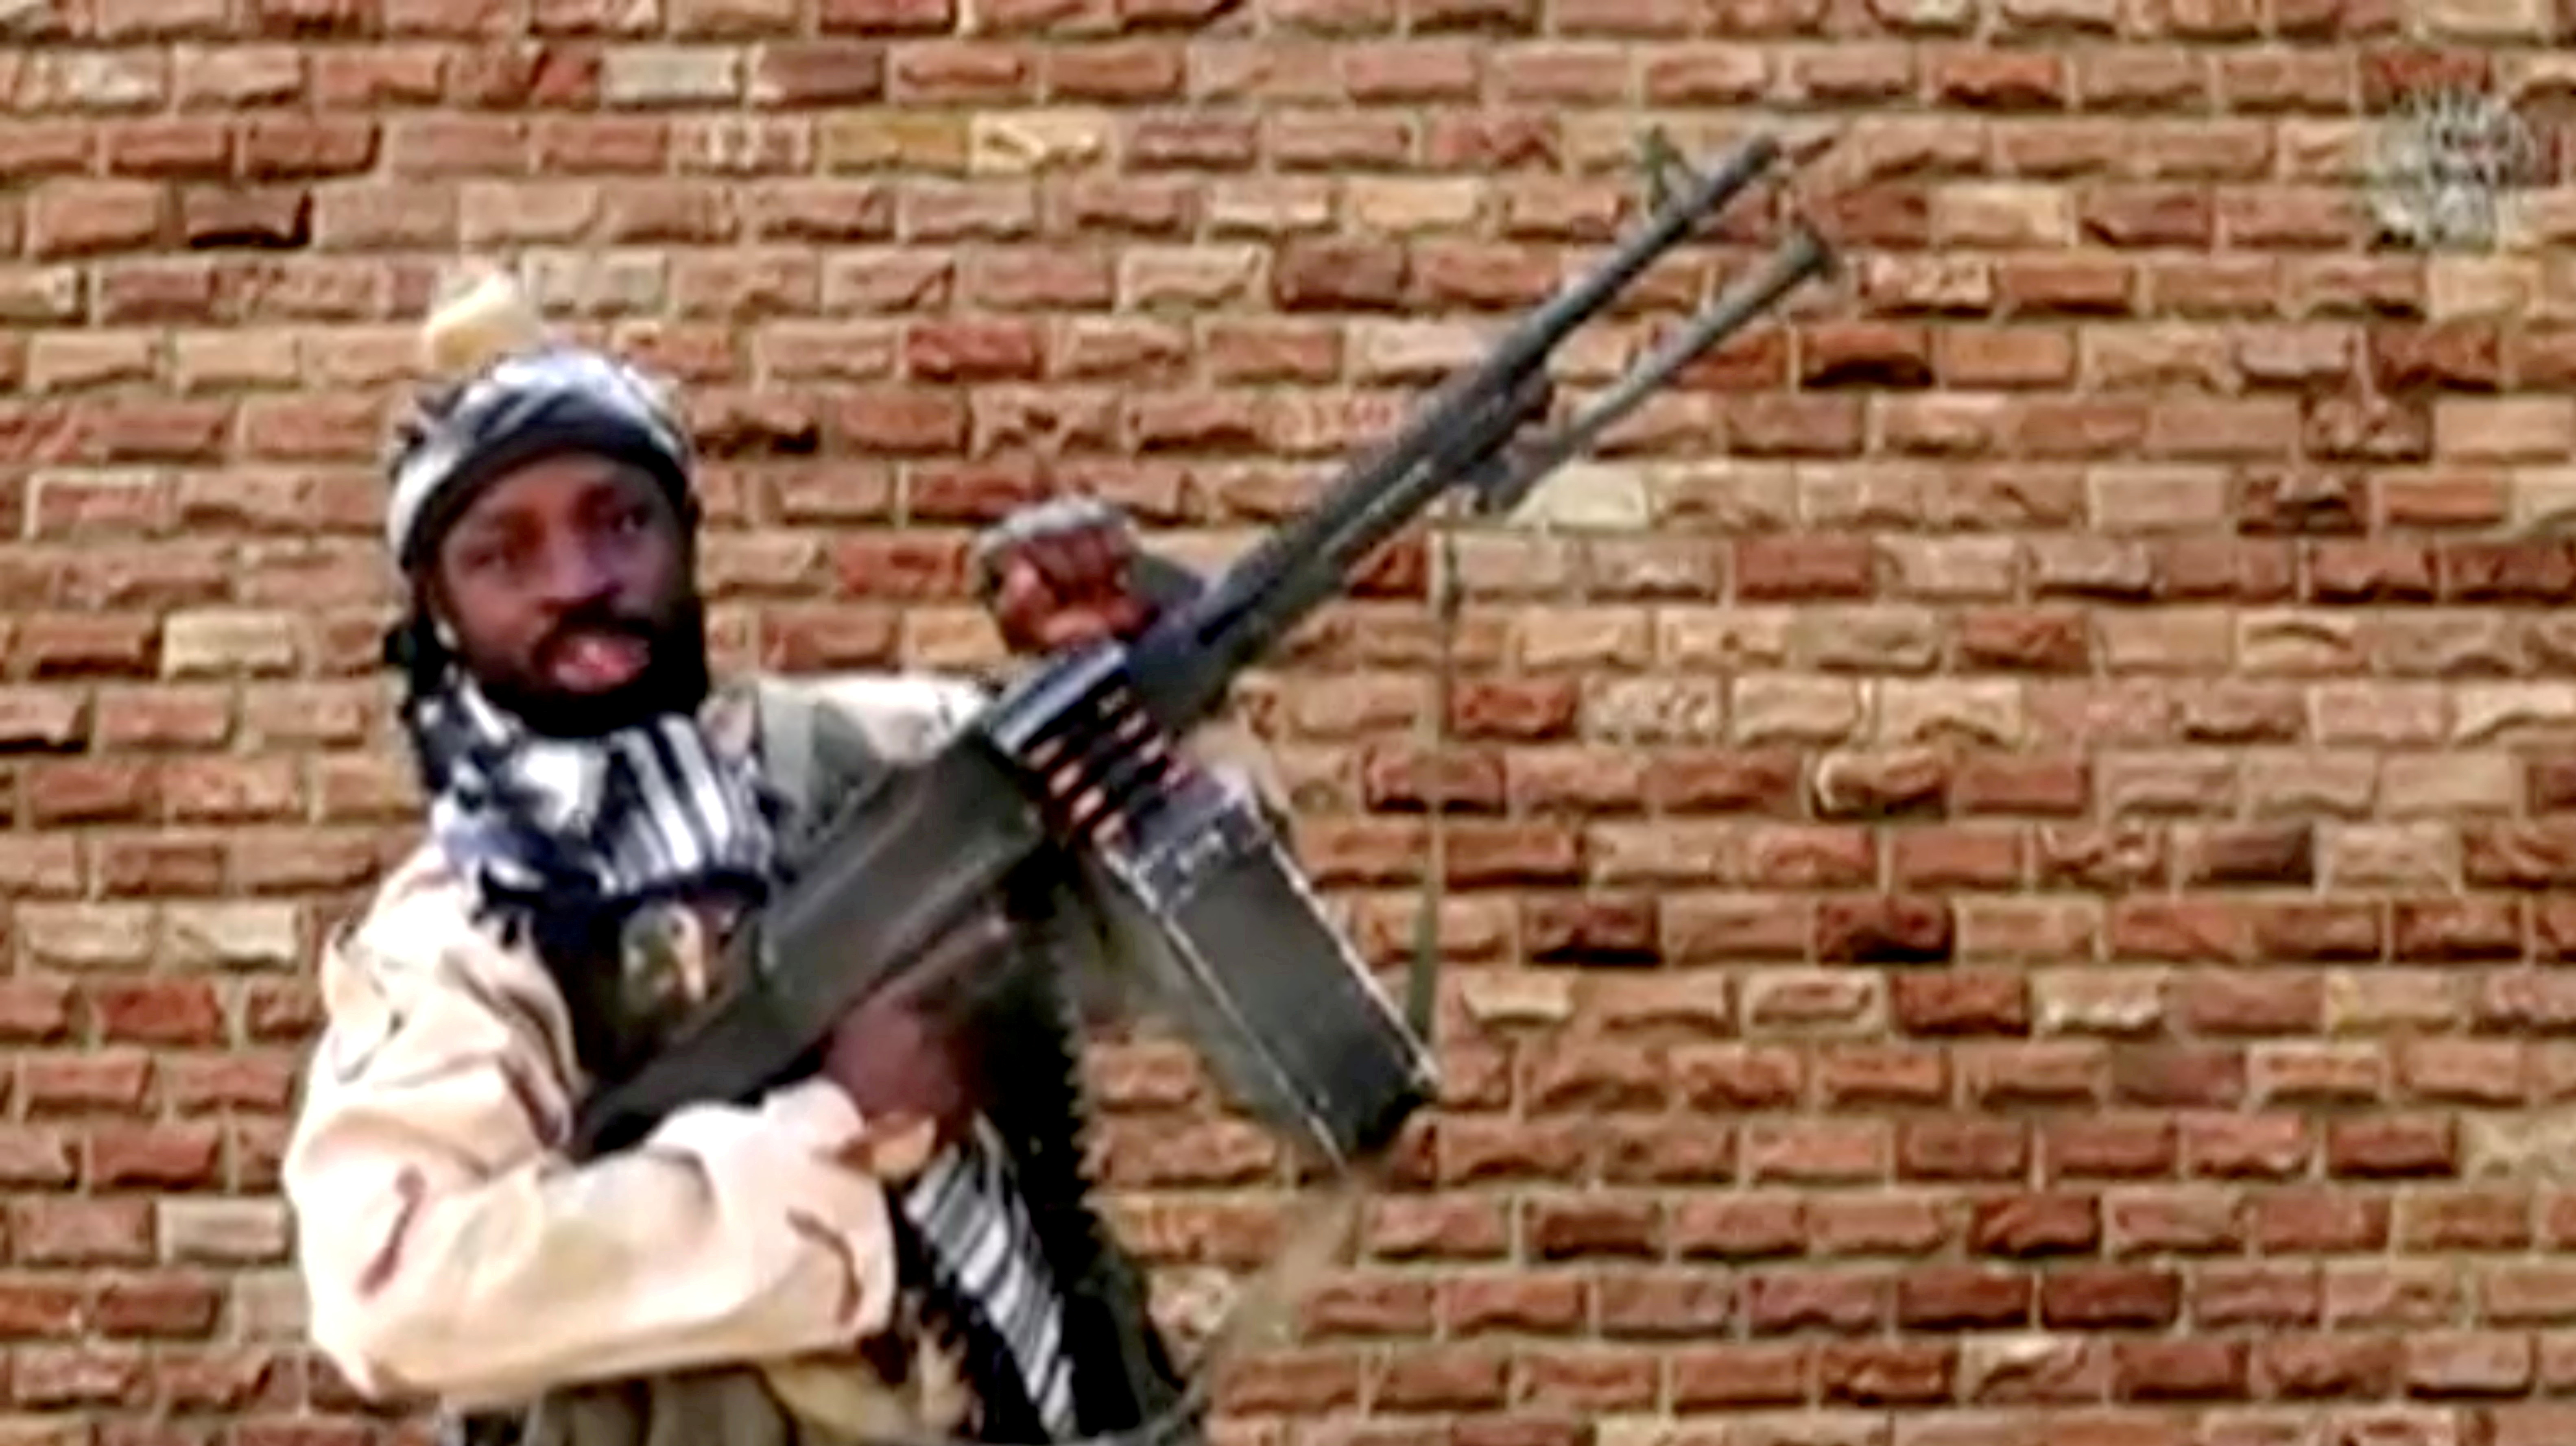  Boko Haram leader Abubakar Shekau holds a weapon in an unknown location in Nigeria in this still image taken from an undated video obtained on January 15, 2018. Boko Haram Handout/Sahara Reporters via REUTERS  